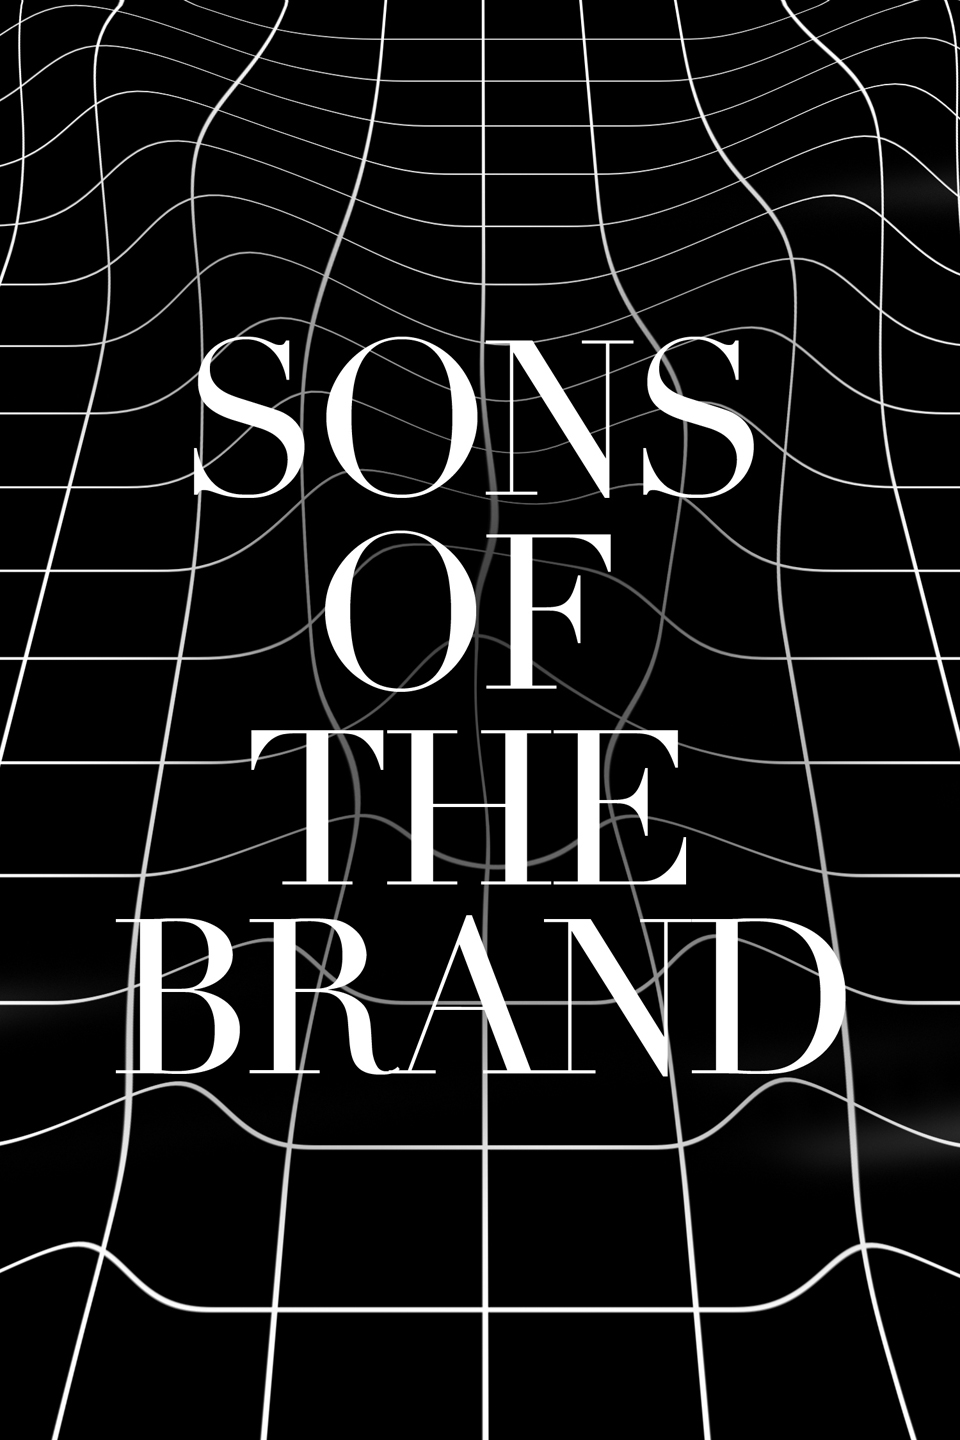 “SONS OF THE BRAND”